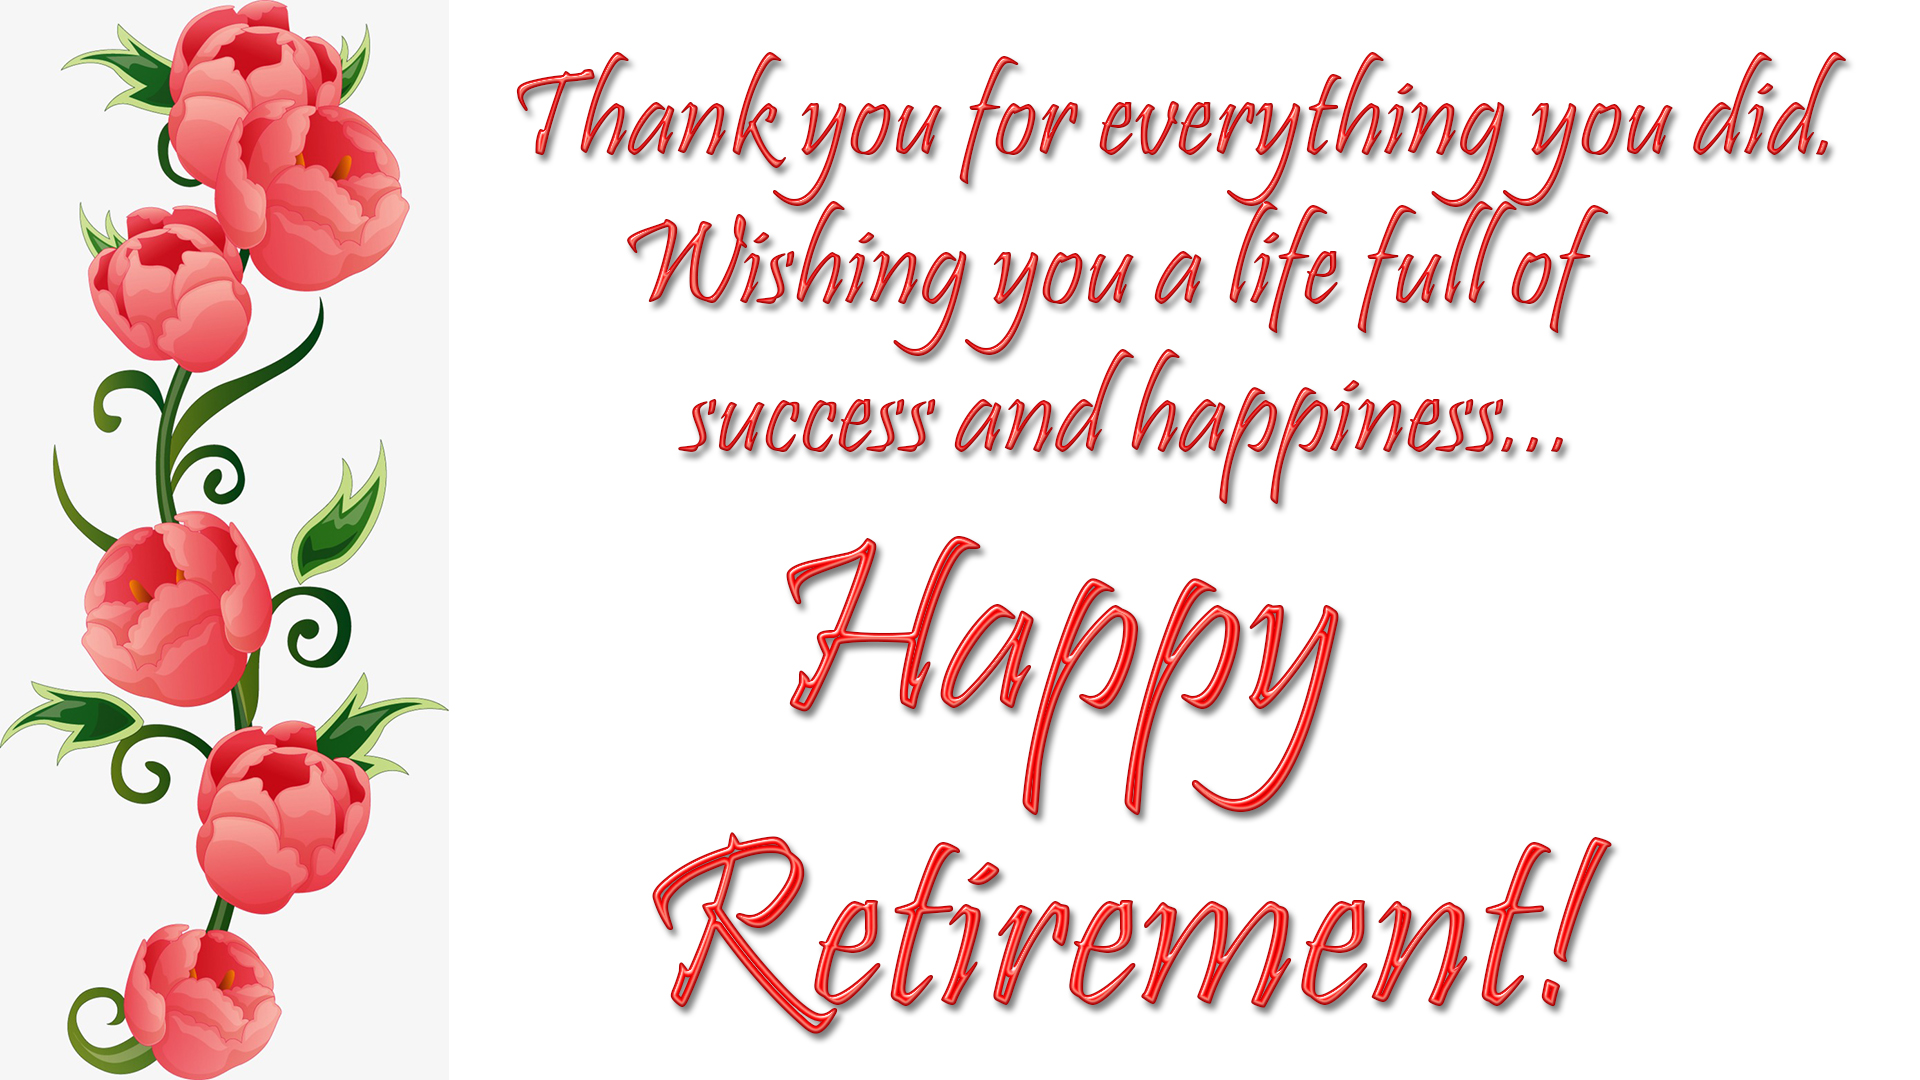 Happy Retirement Wishes Quotes Messages Images